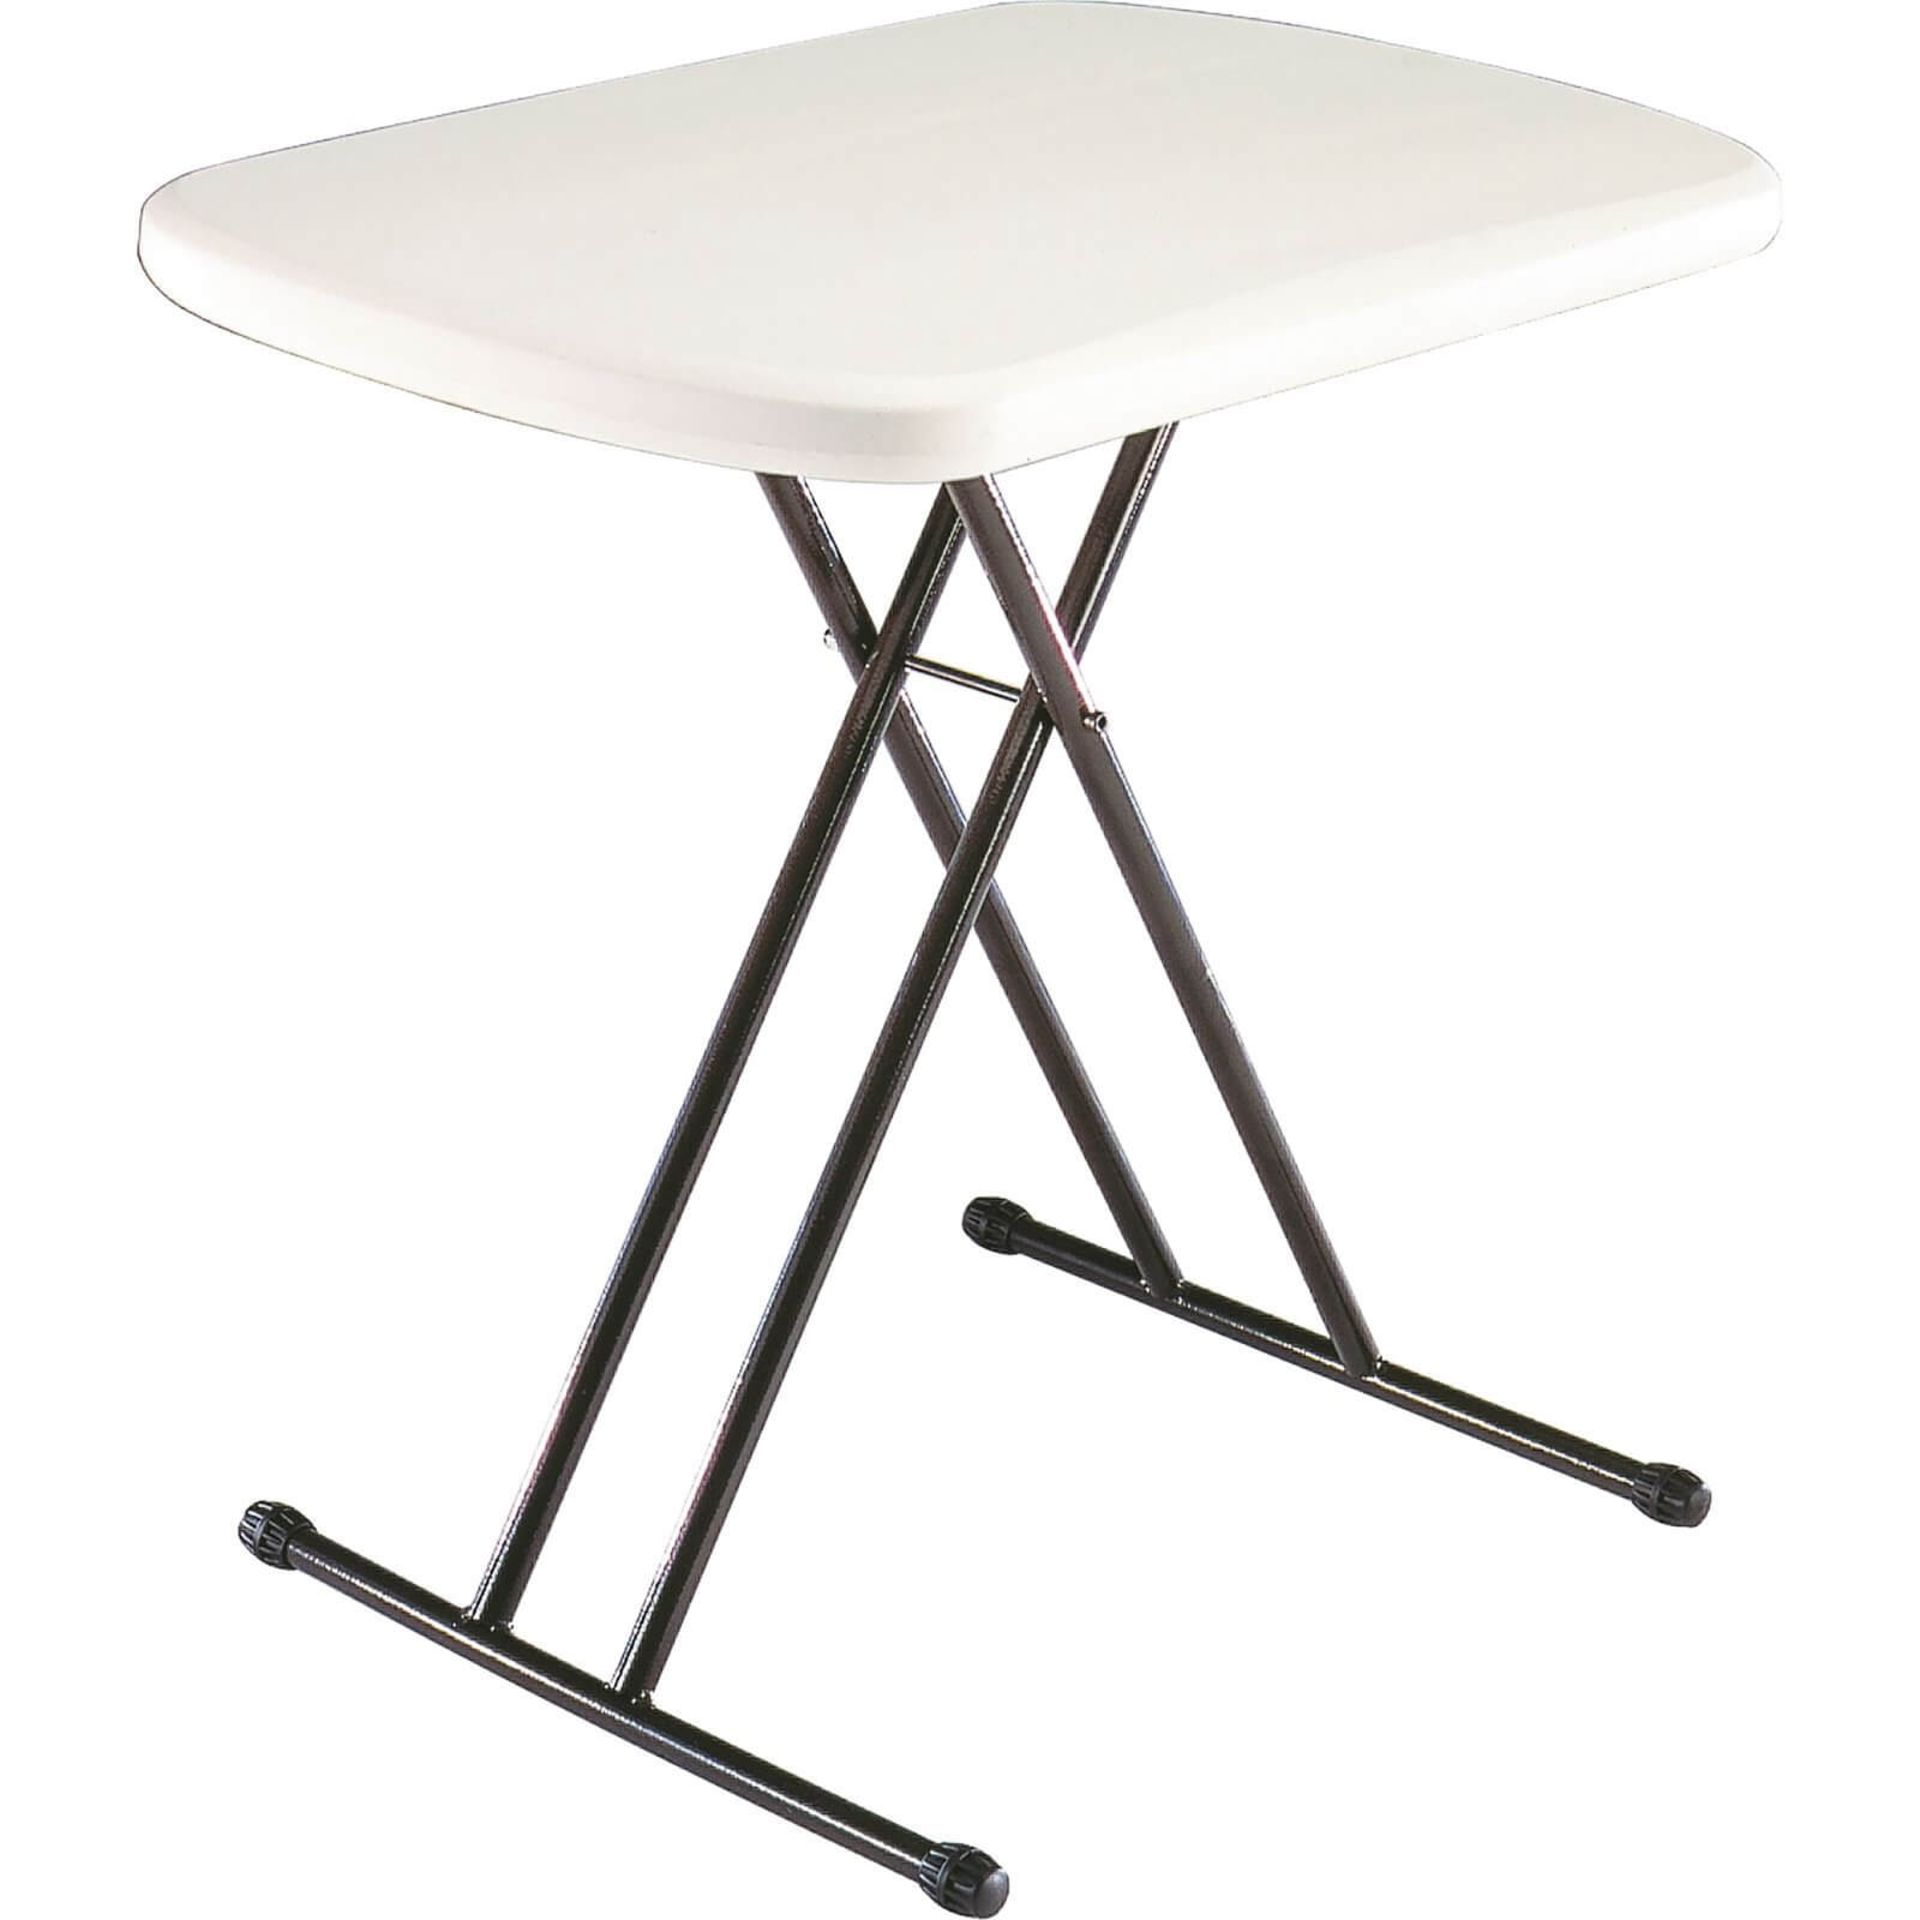 (R7F) 4 X Lifetime 658mm Personal Table (Appears New) - Image 2 of 5